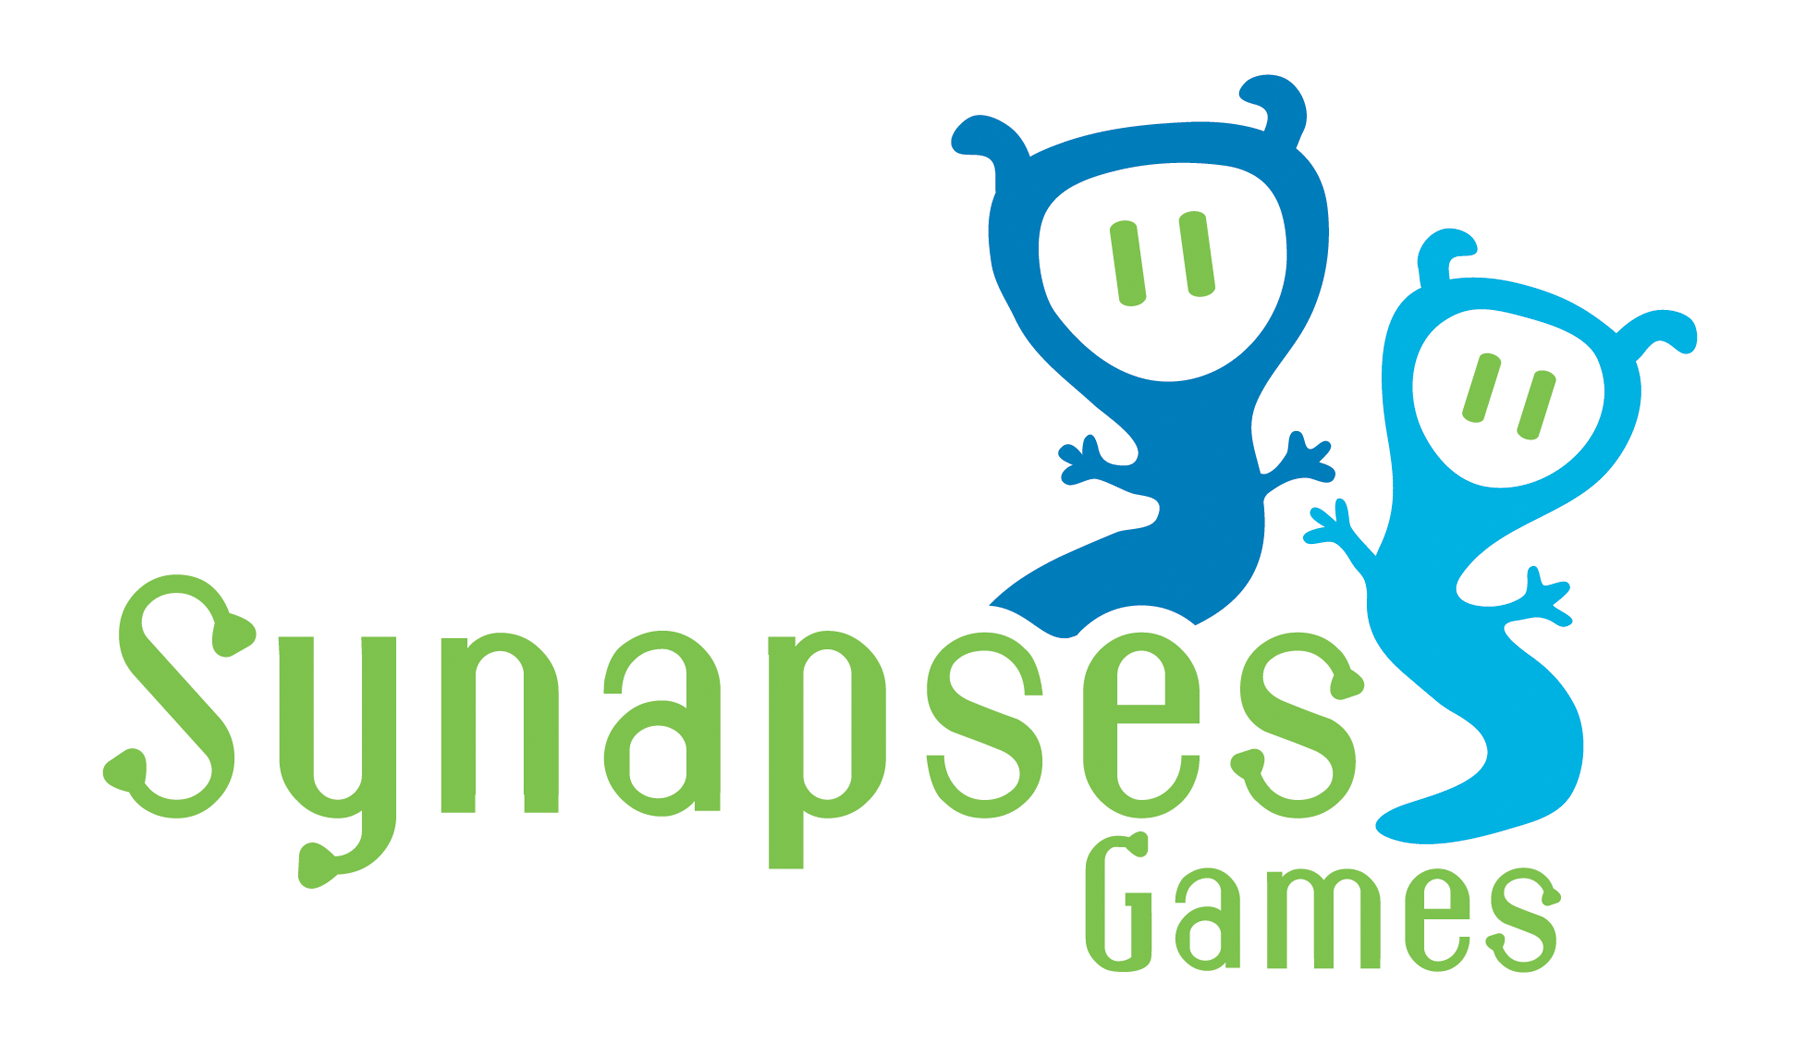 This is the company logo/link of our partner Synapses Games